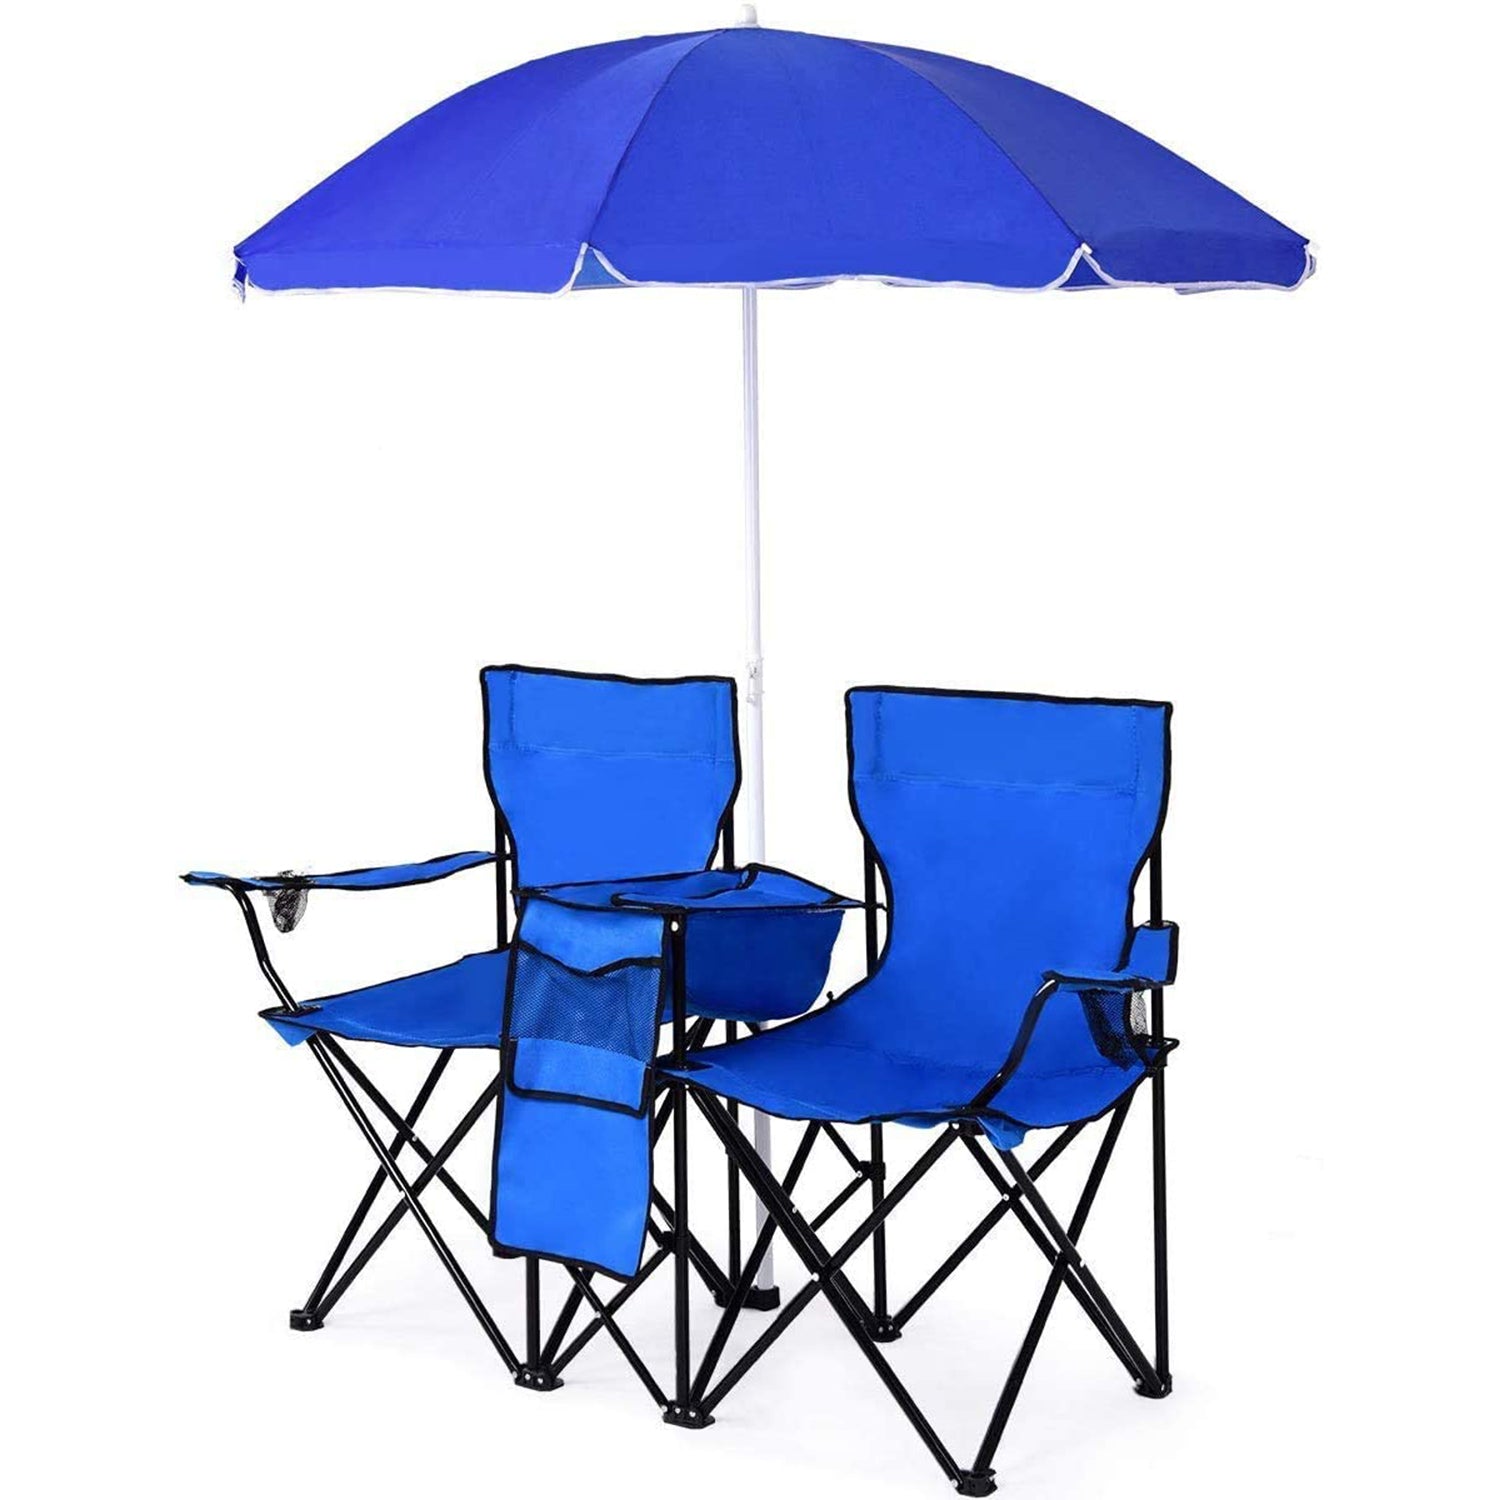 Portable Blue Steel Folding Camping Chair with Umbrella and Carry Bag